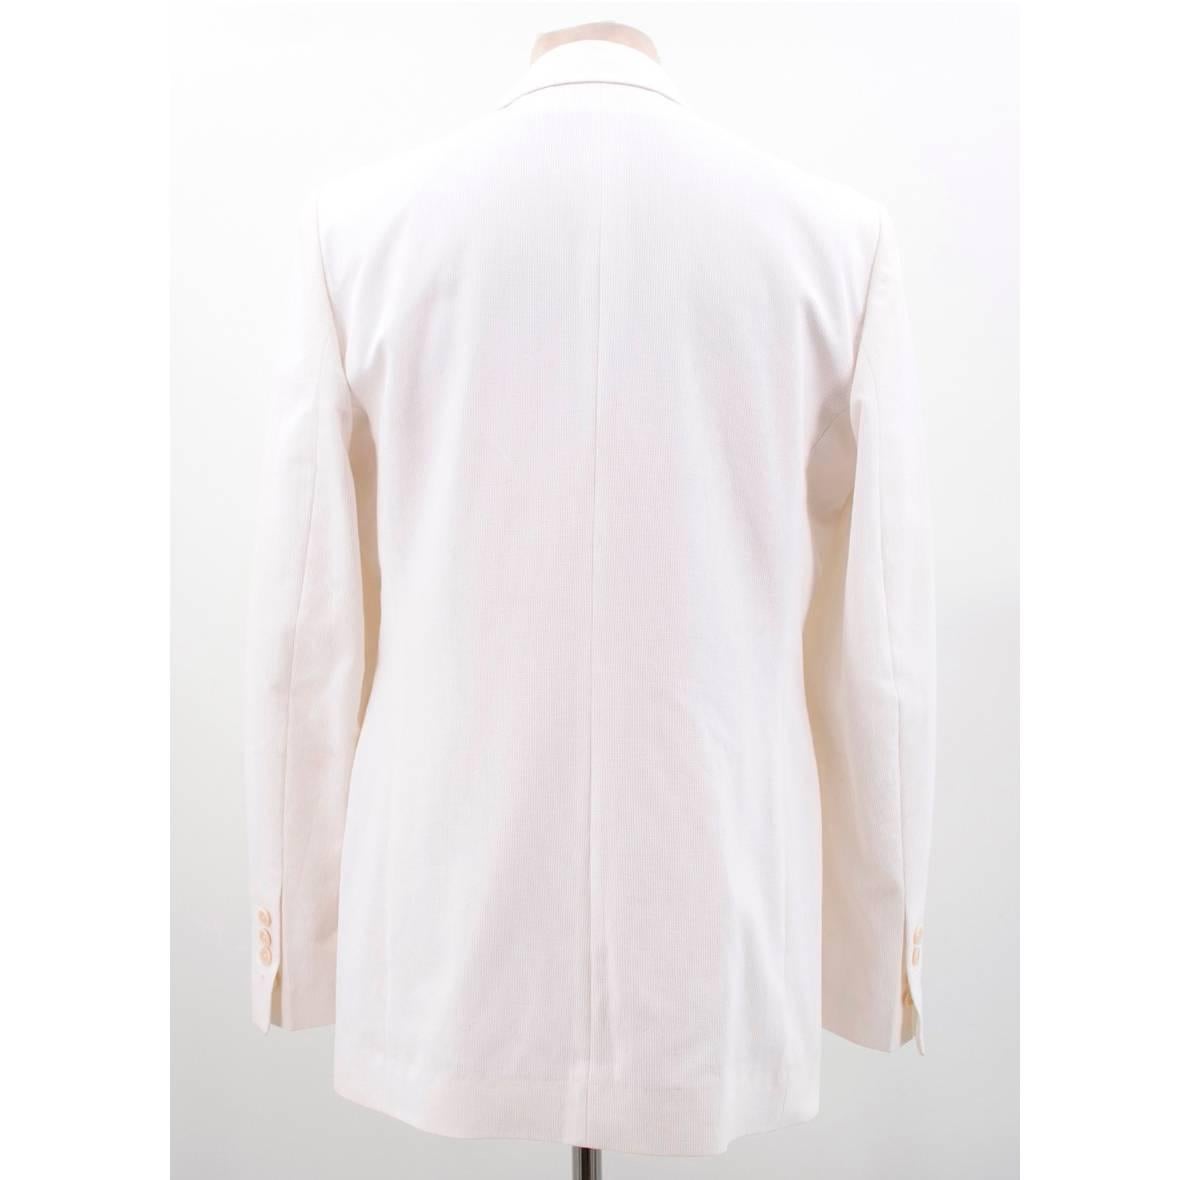 Ann Demeulemeester White Textured Suit For Sale 2